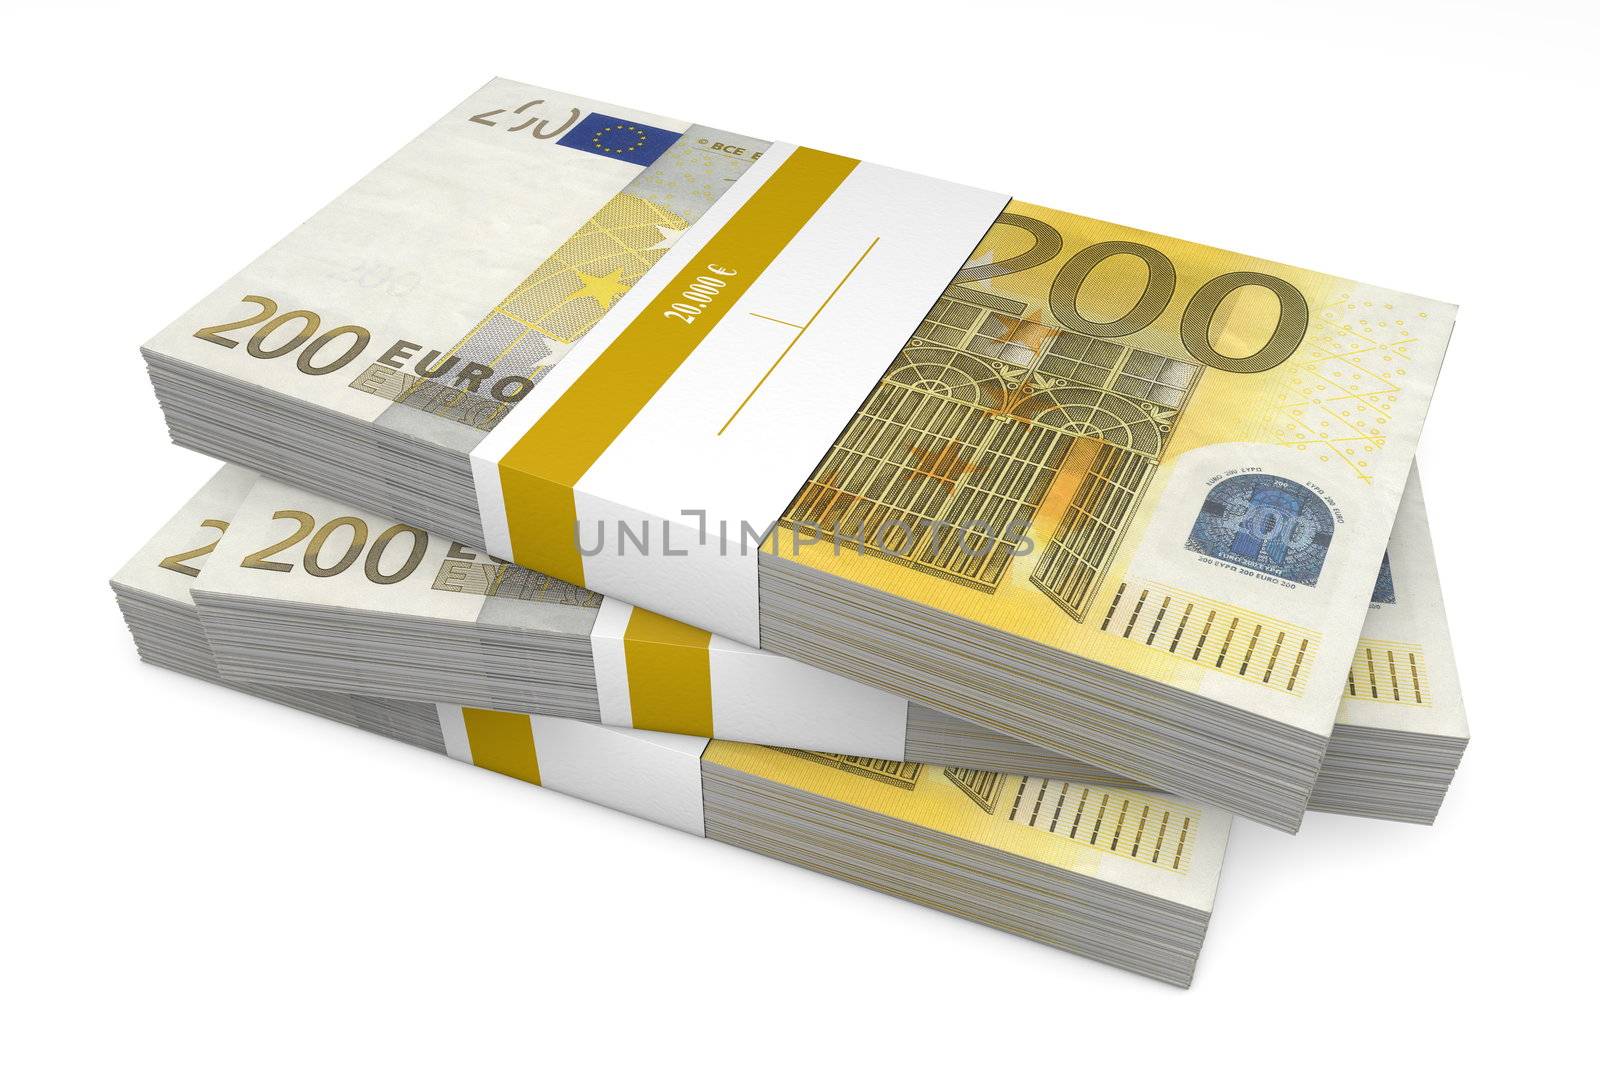 three packet of 200 Euro notes with bank wrapper - 20.000 Euros each